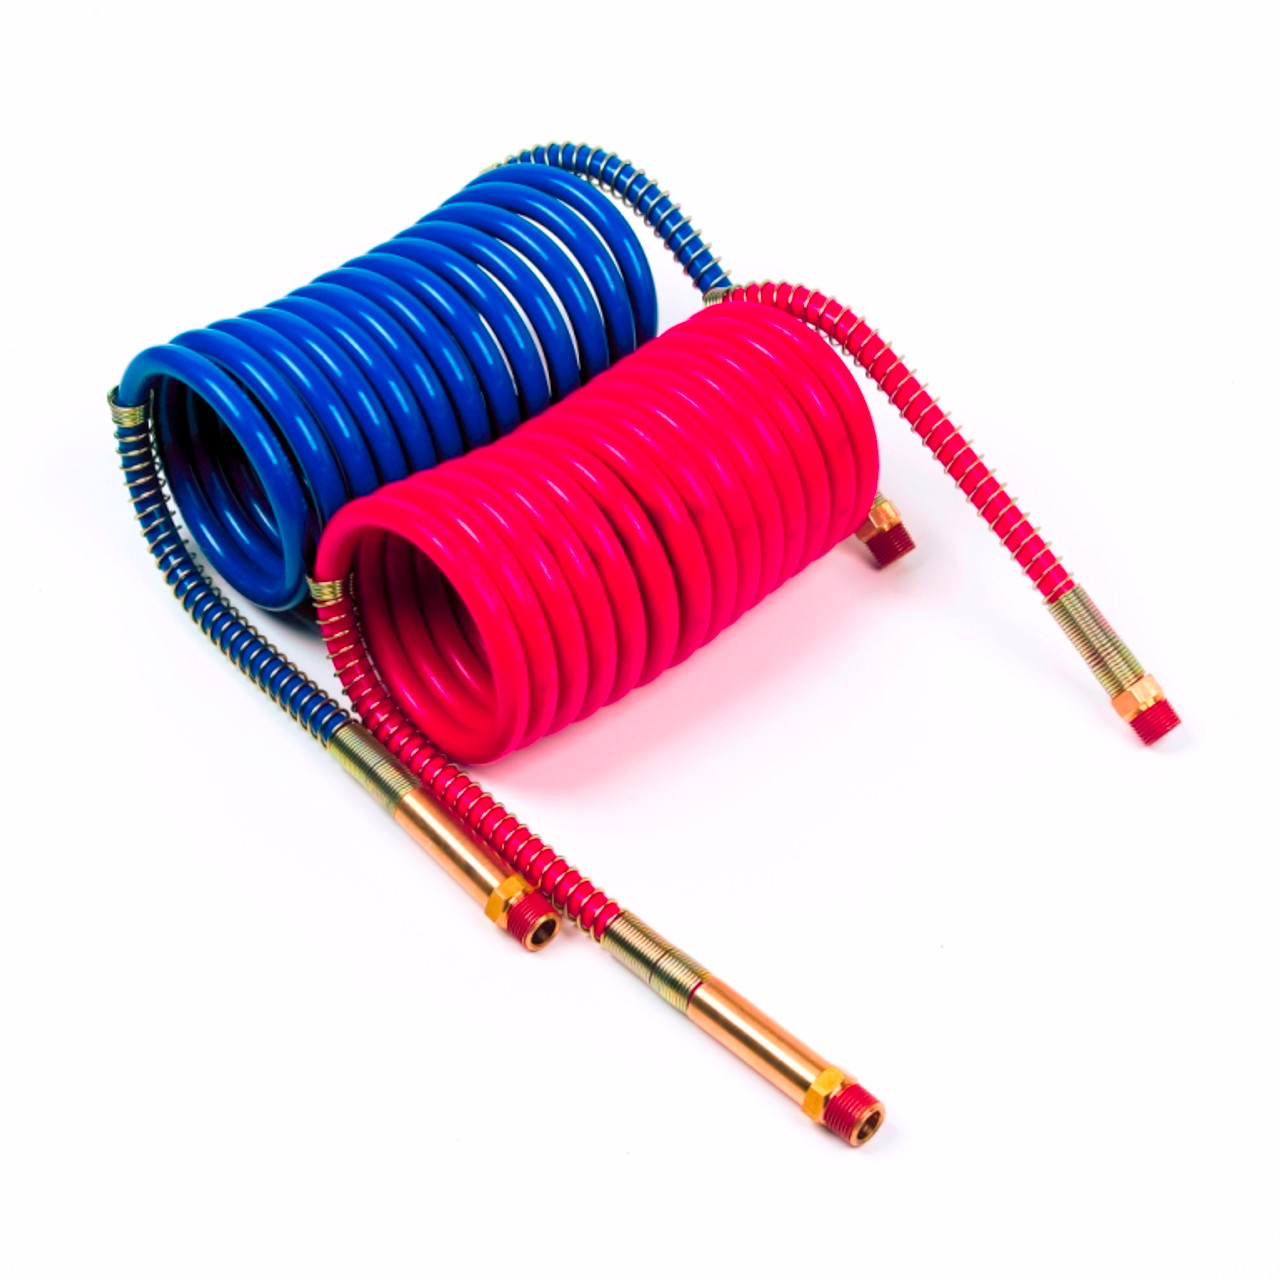 1/2" x 12' @ 2 Pack Red/Blue Low Temp Recoil Air Hoses w/Male NPT Fittings  81-0012-C